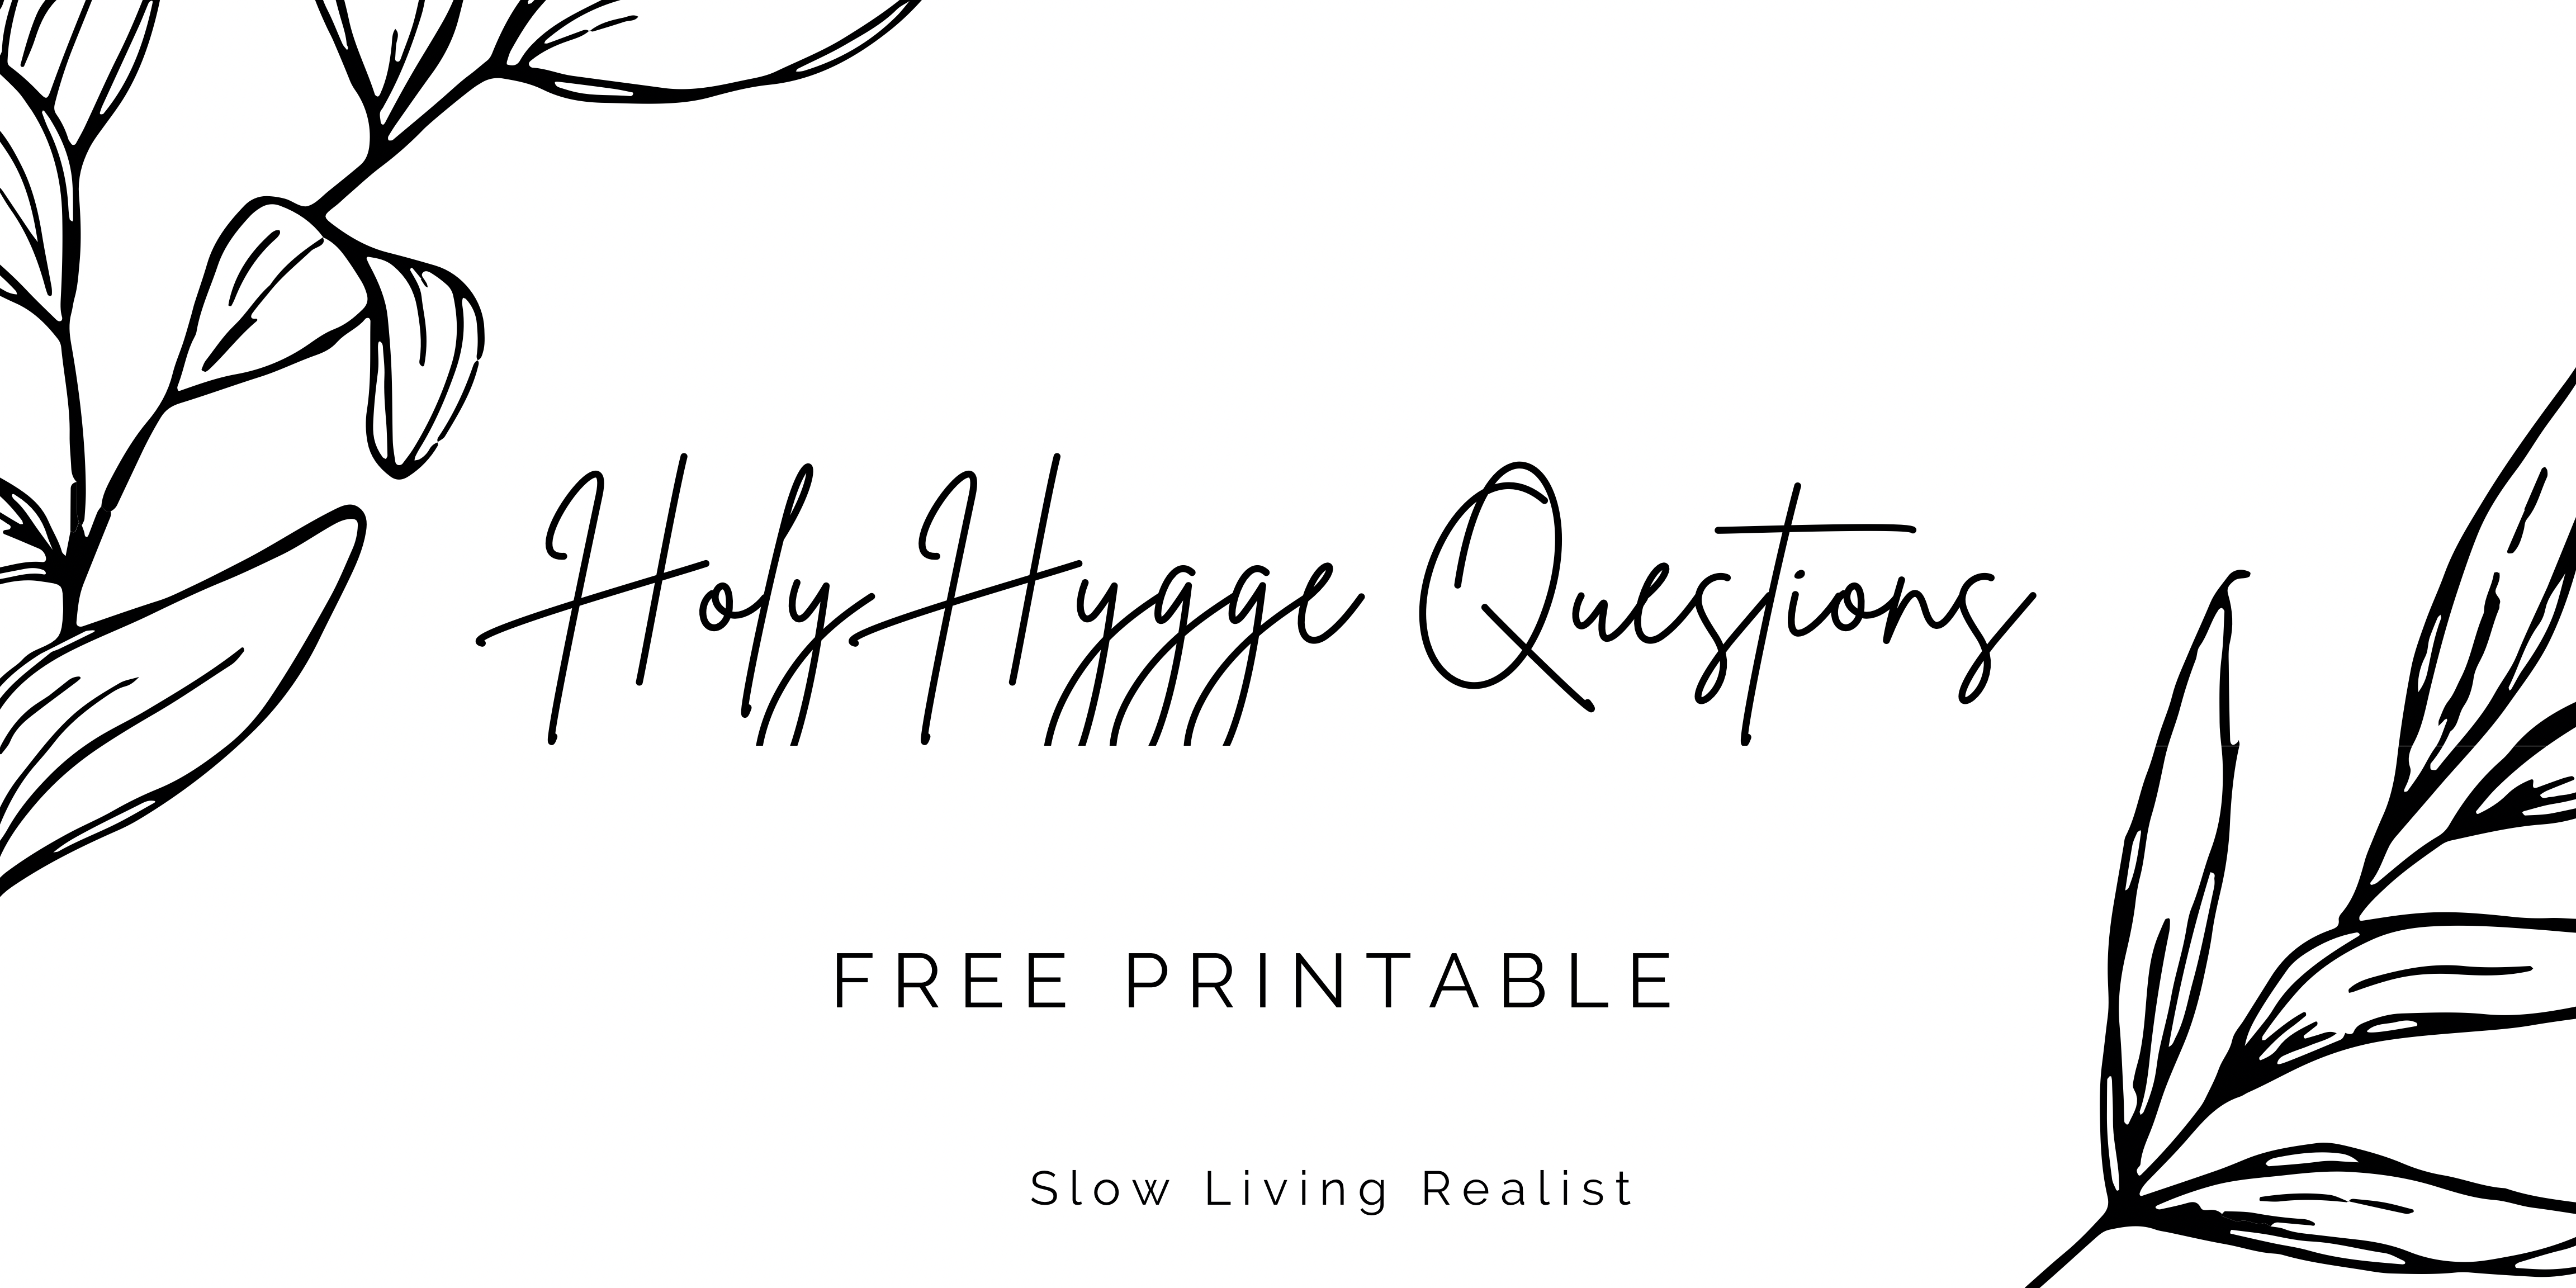 Holy Hygge Questions – Free Printable